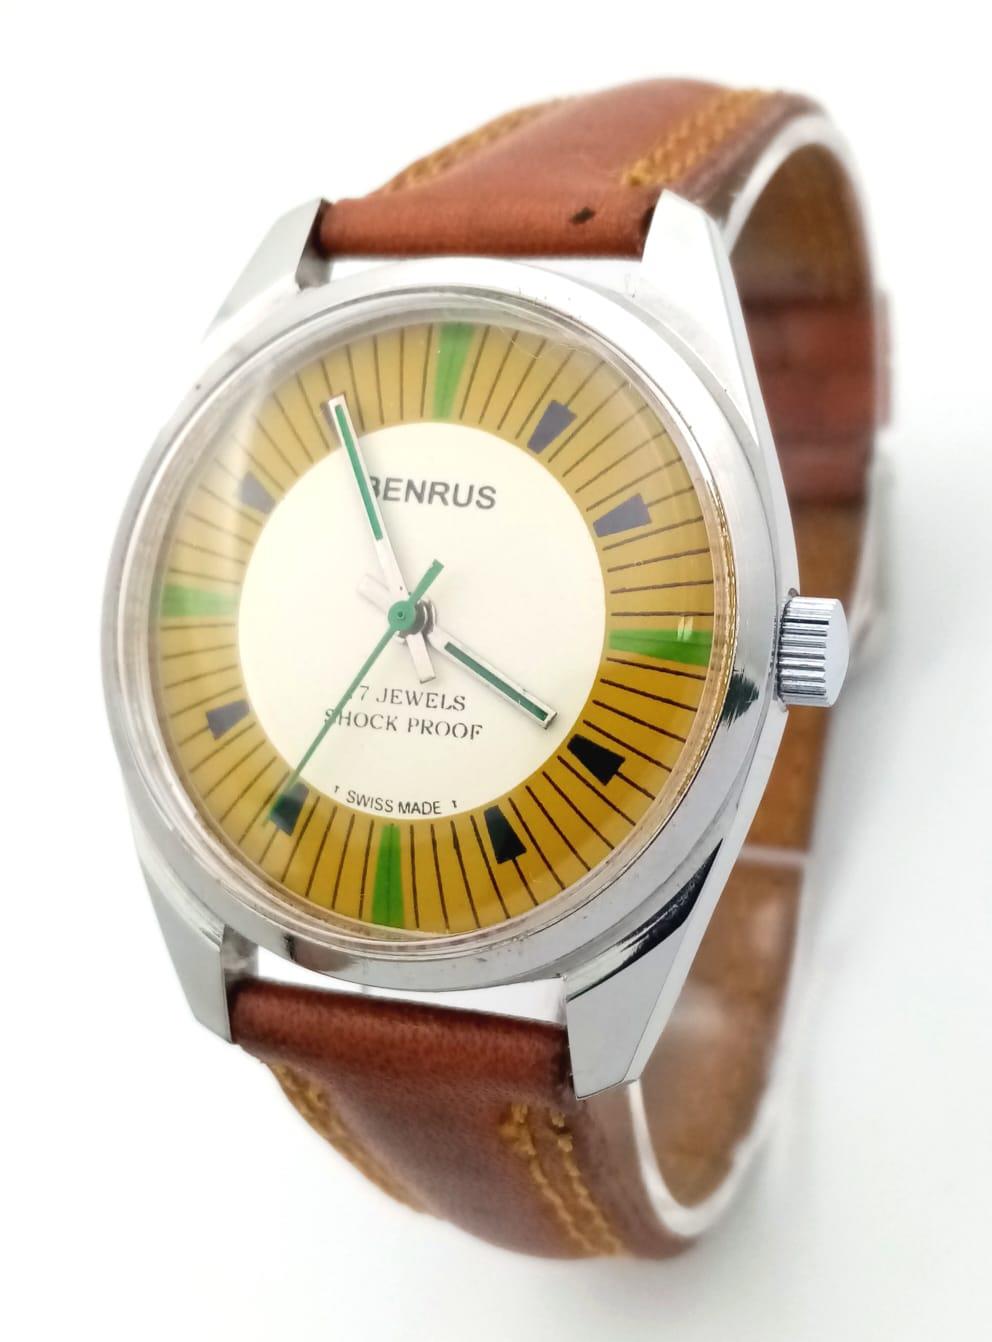 A Vintage Benrus Mechanical Gents Watch. Brown leather strap. Stainless steel case - 36mm. Two